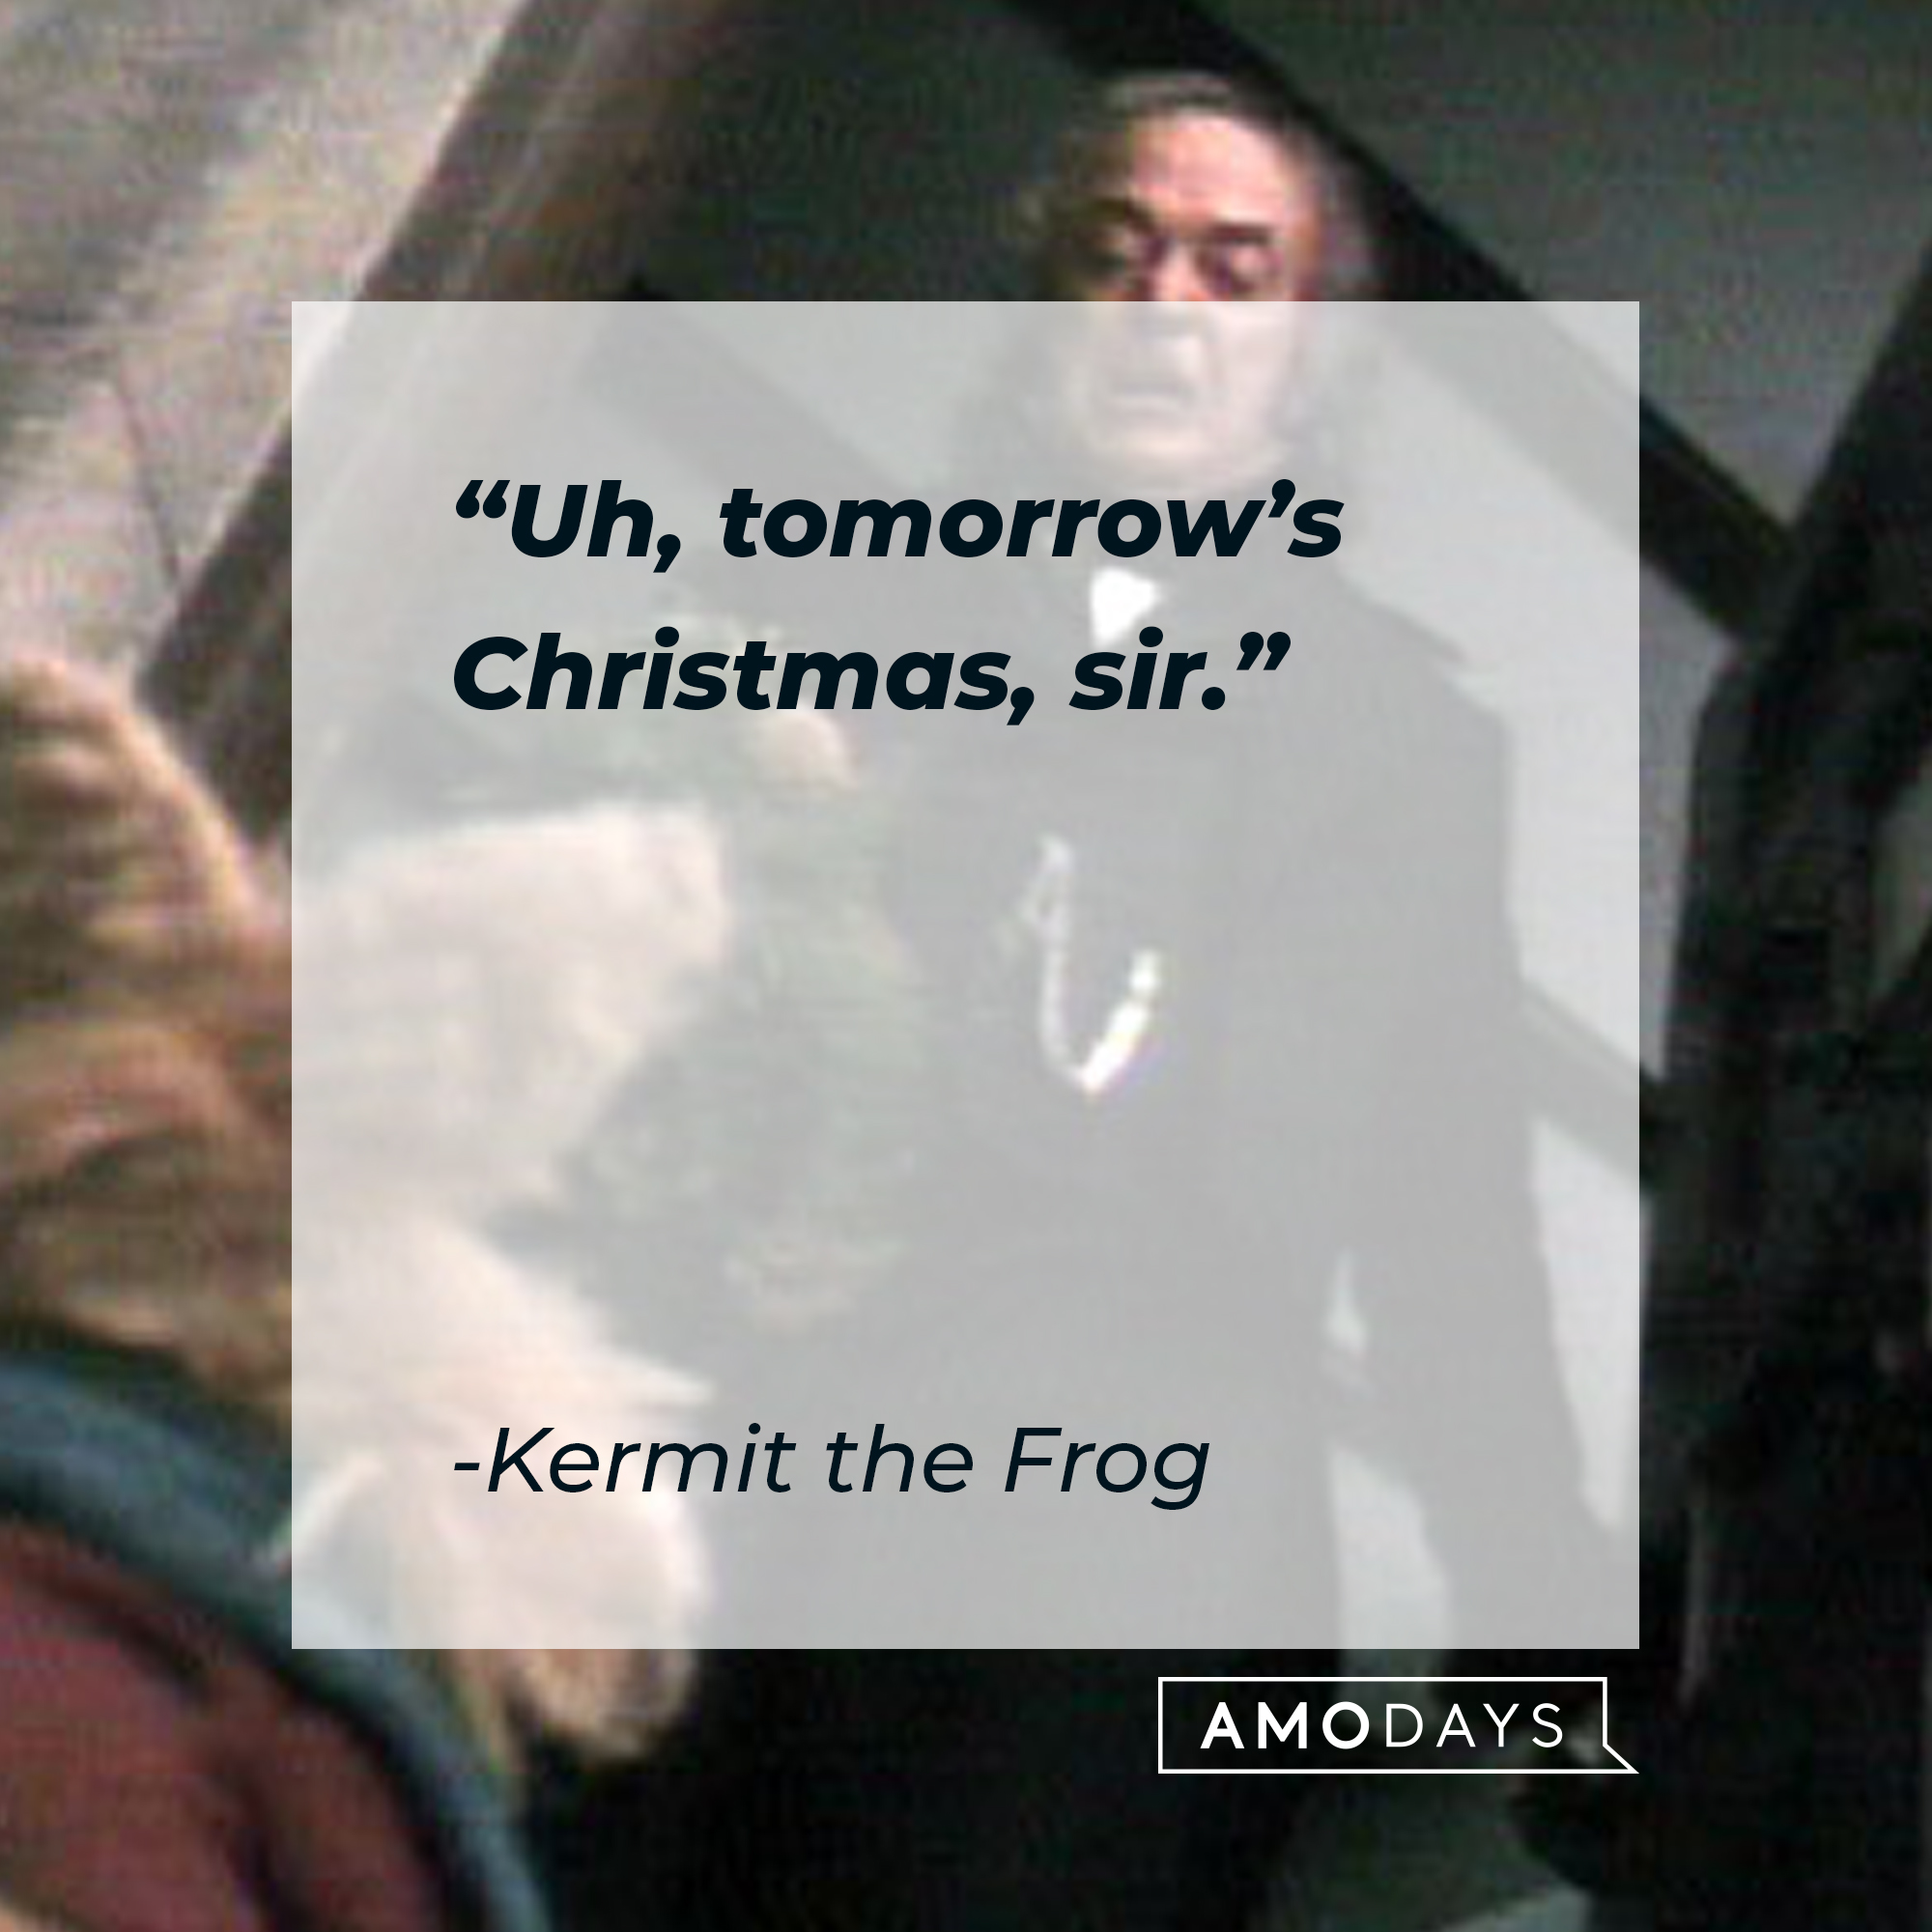 Kermit the Frog's quote: “Uh, tomorrow’s Christmas, sir.” | Source: facebook.com/The Muppets Christmas Carol